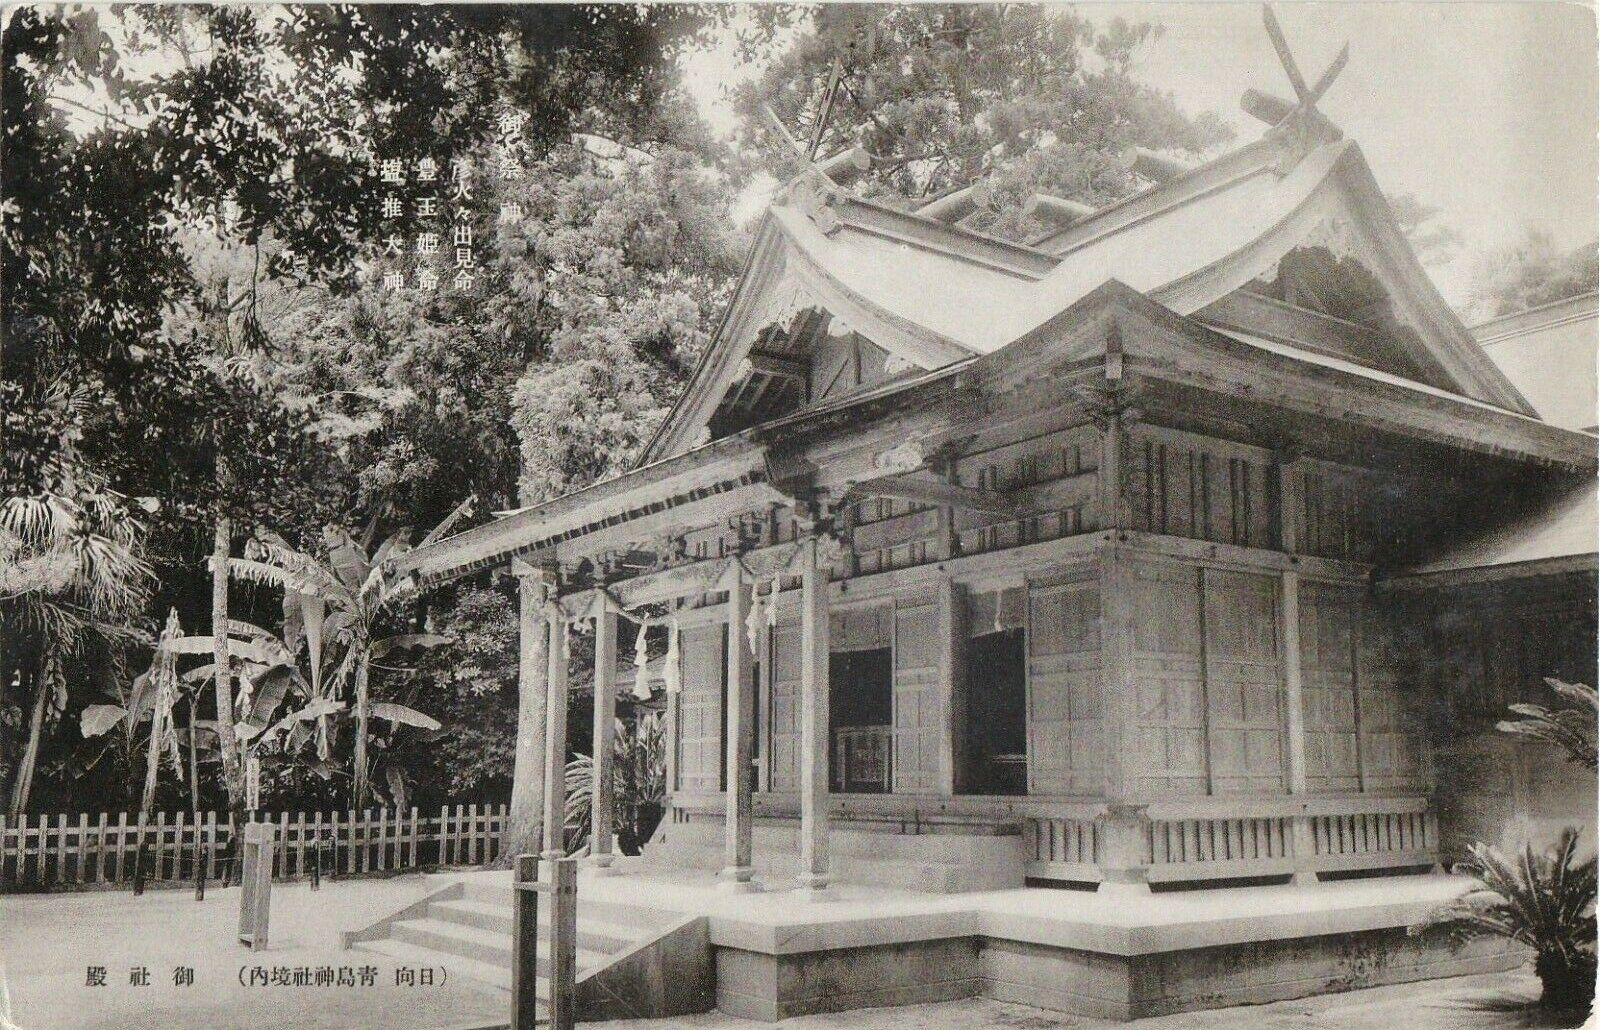 RPPC Chinese Pagoda House Surrounded by Trees Photo Unposted Printed in China